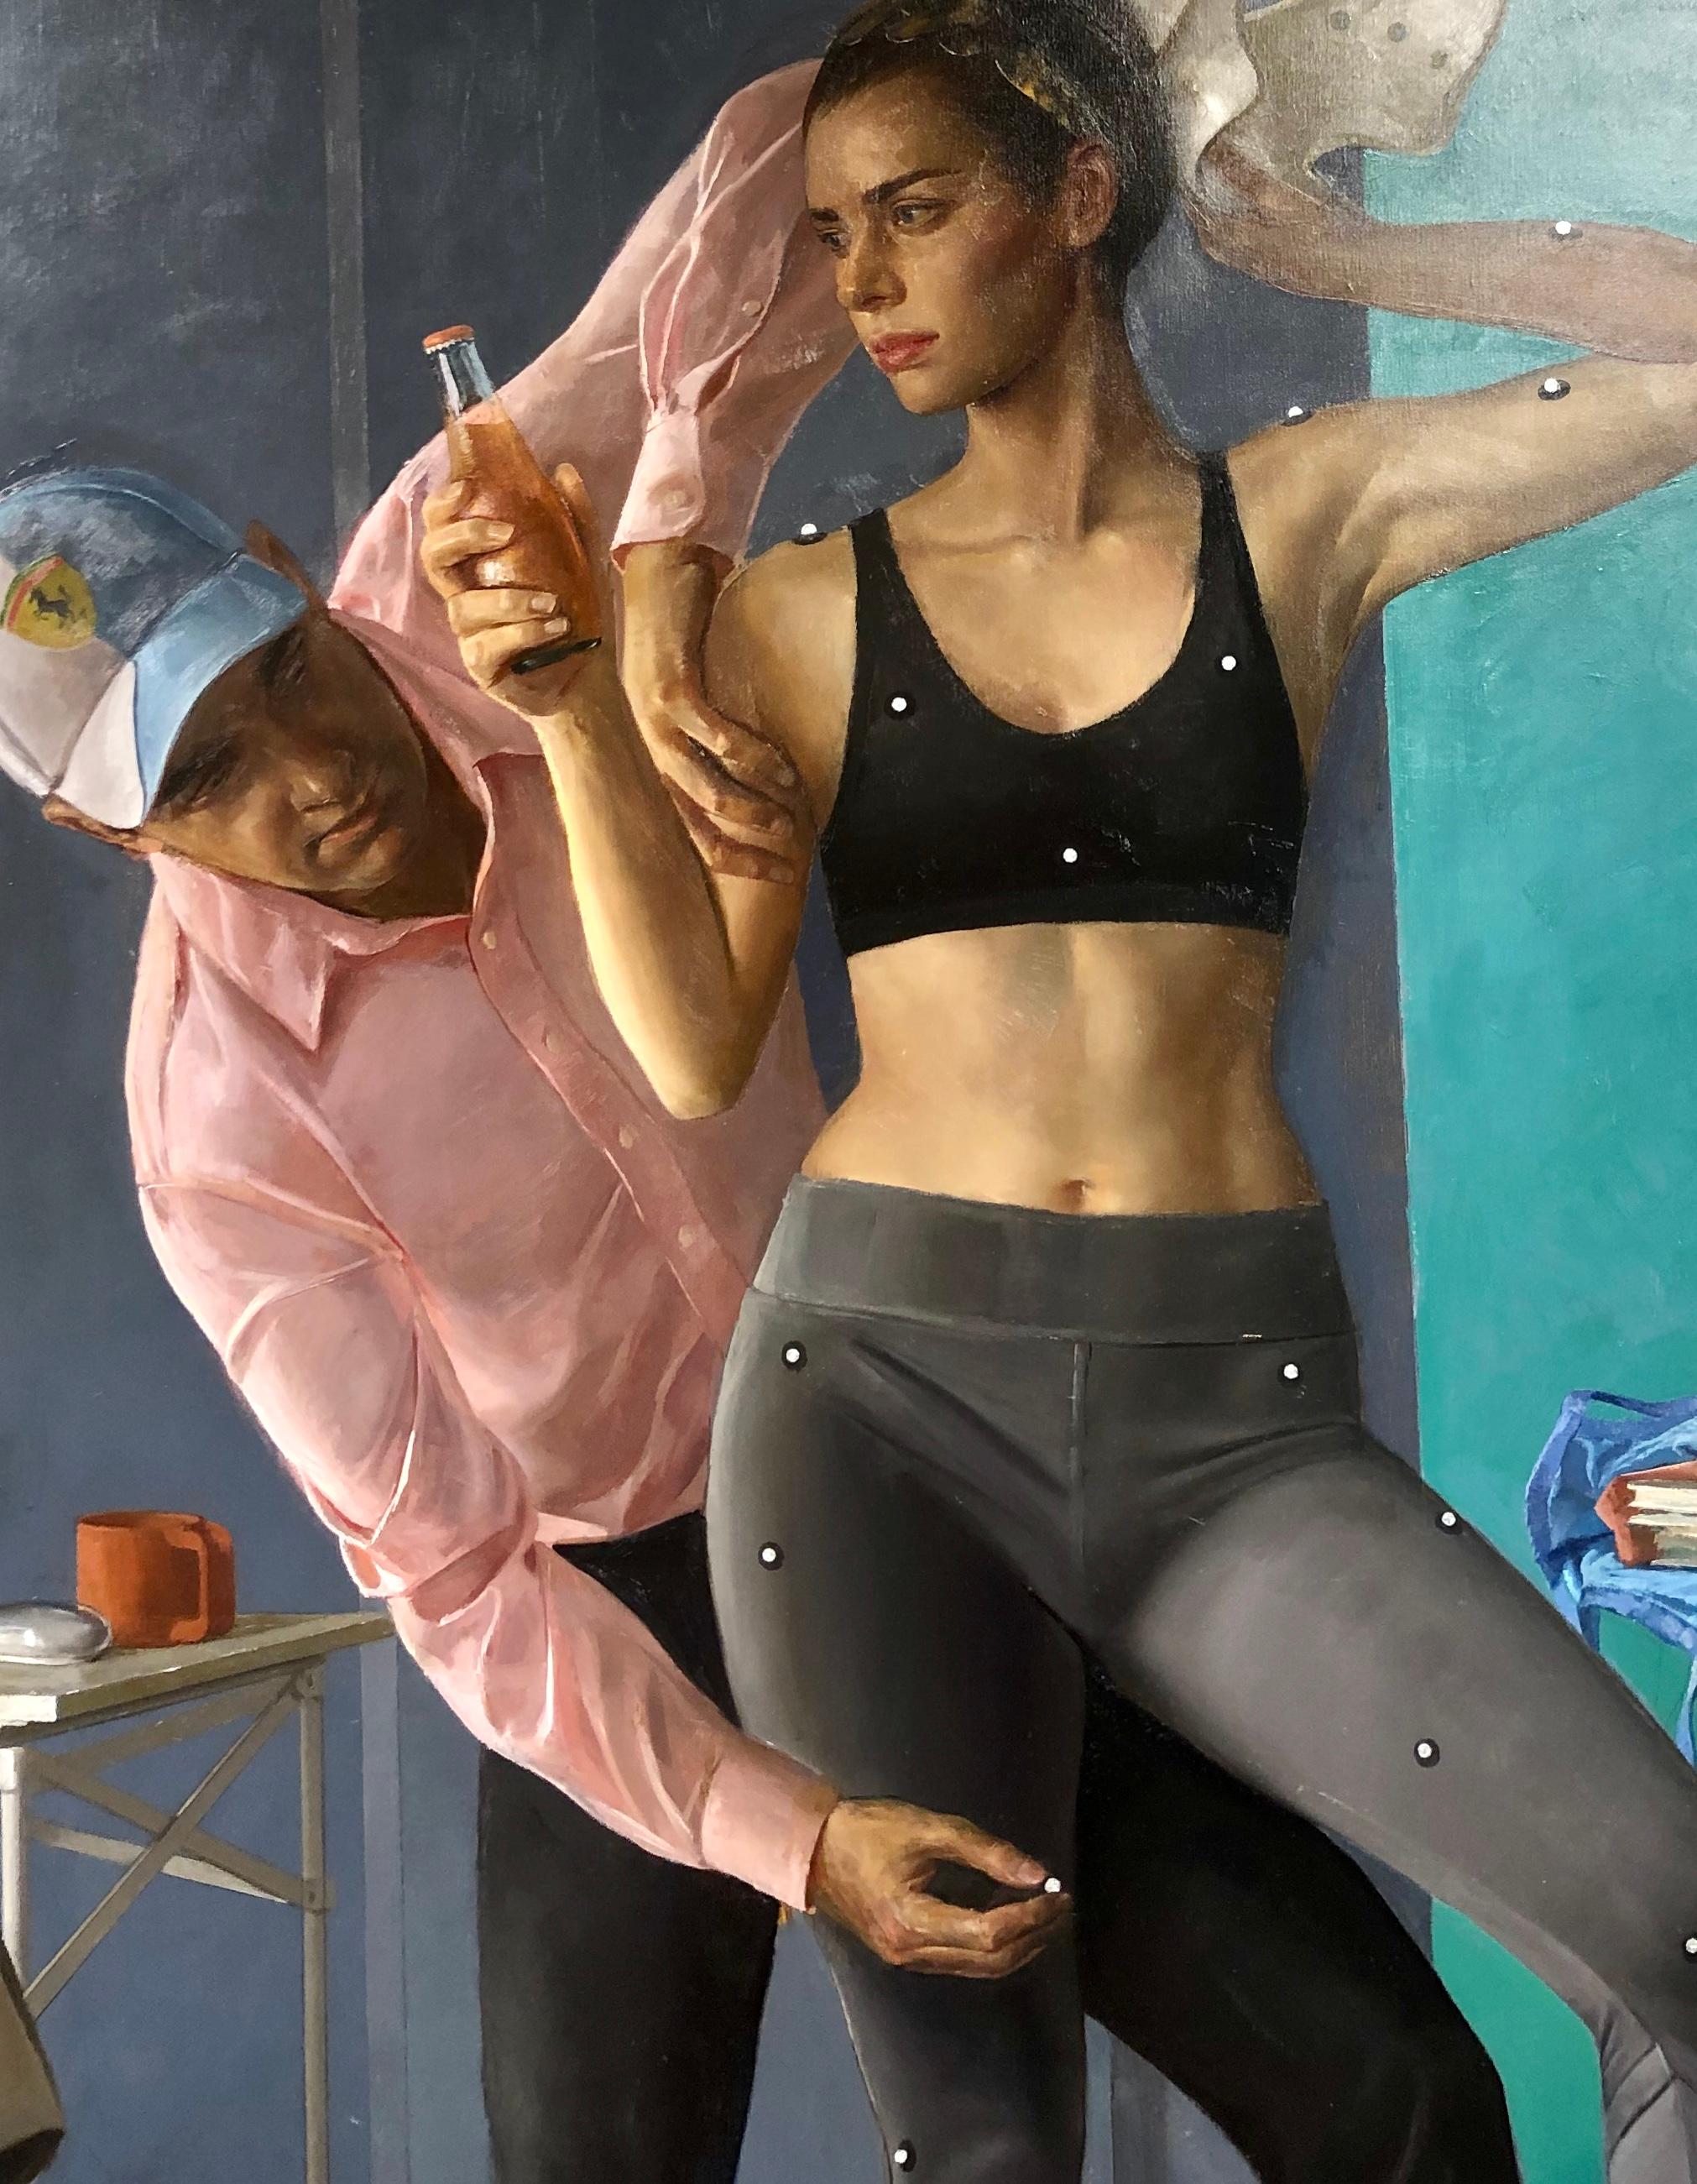 Motion Capture Studio 9, Scene Depicting Female Dancers, Male Computer Techs - Painting by Andrew S. Conklin